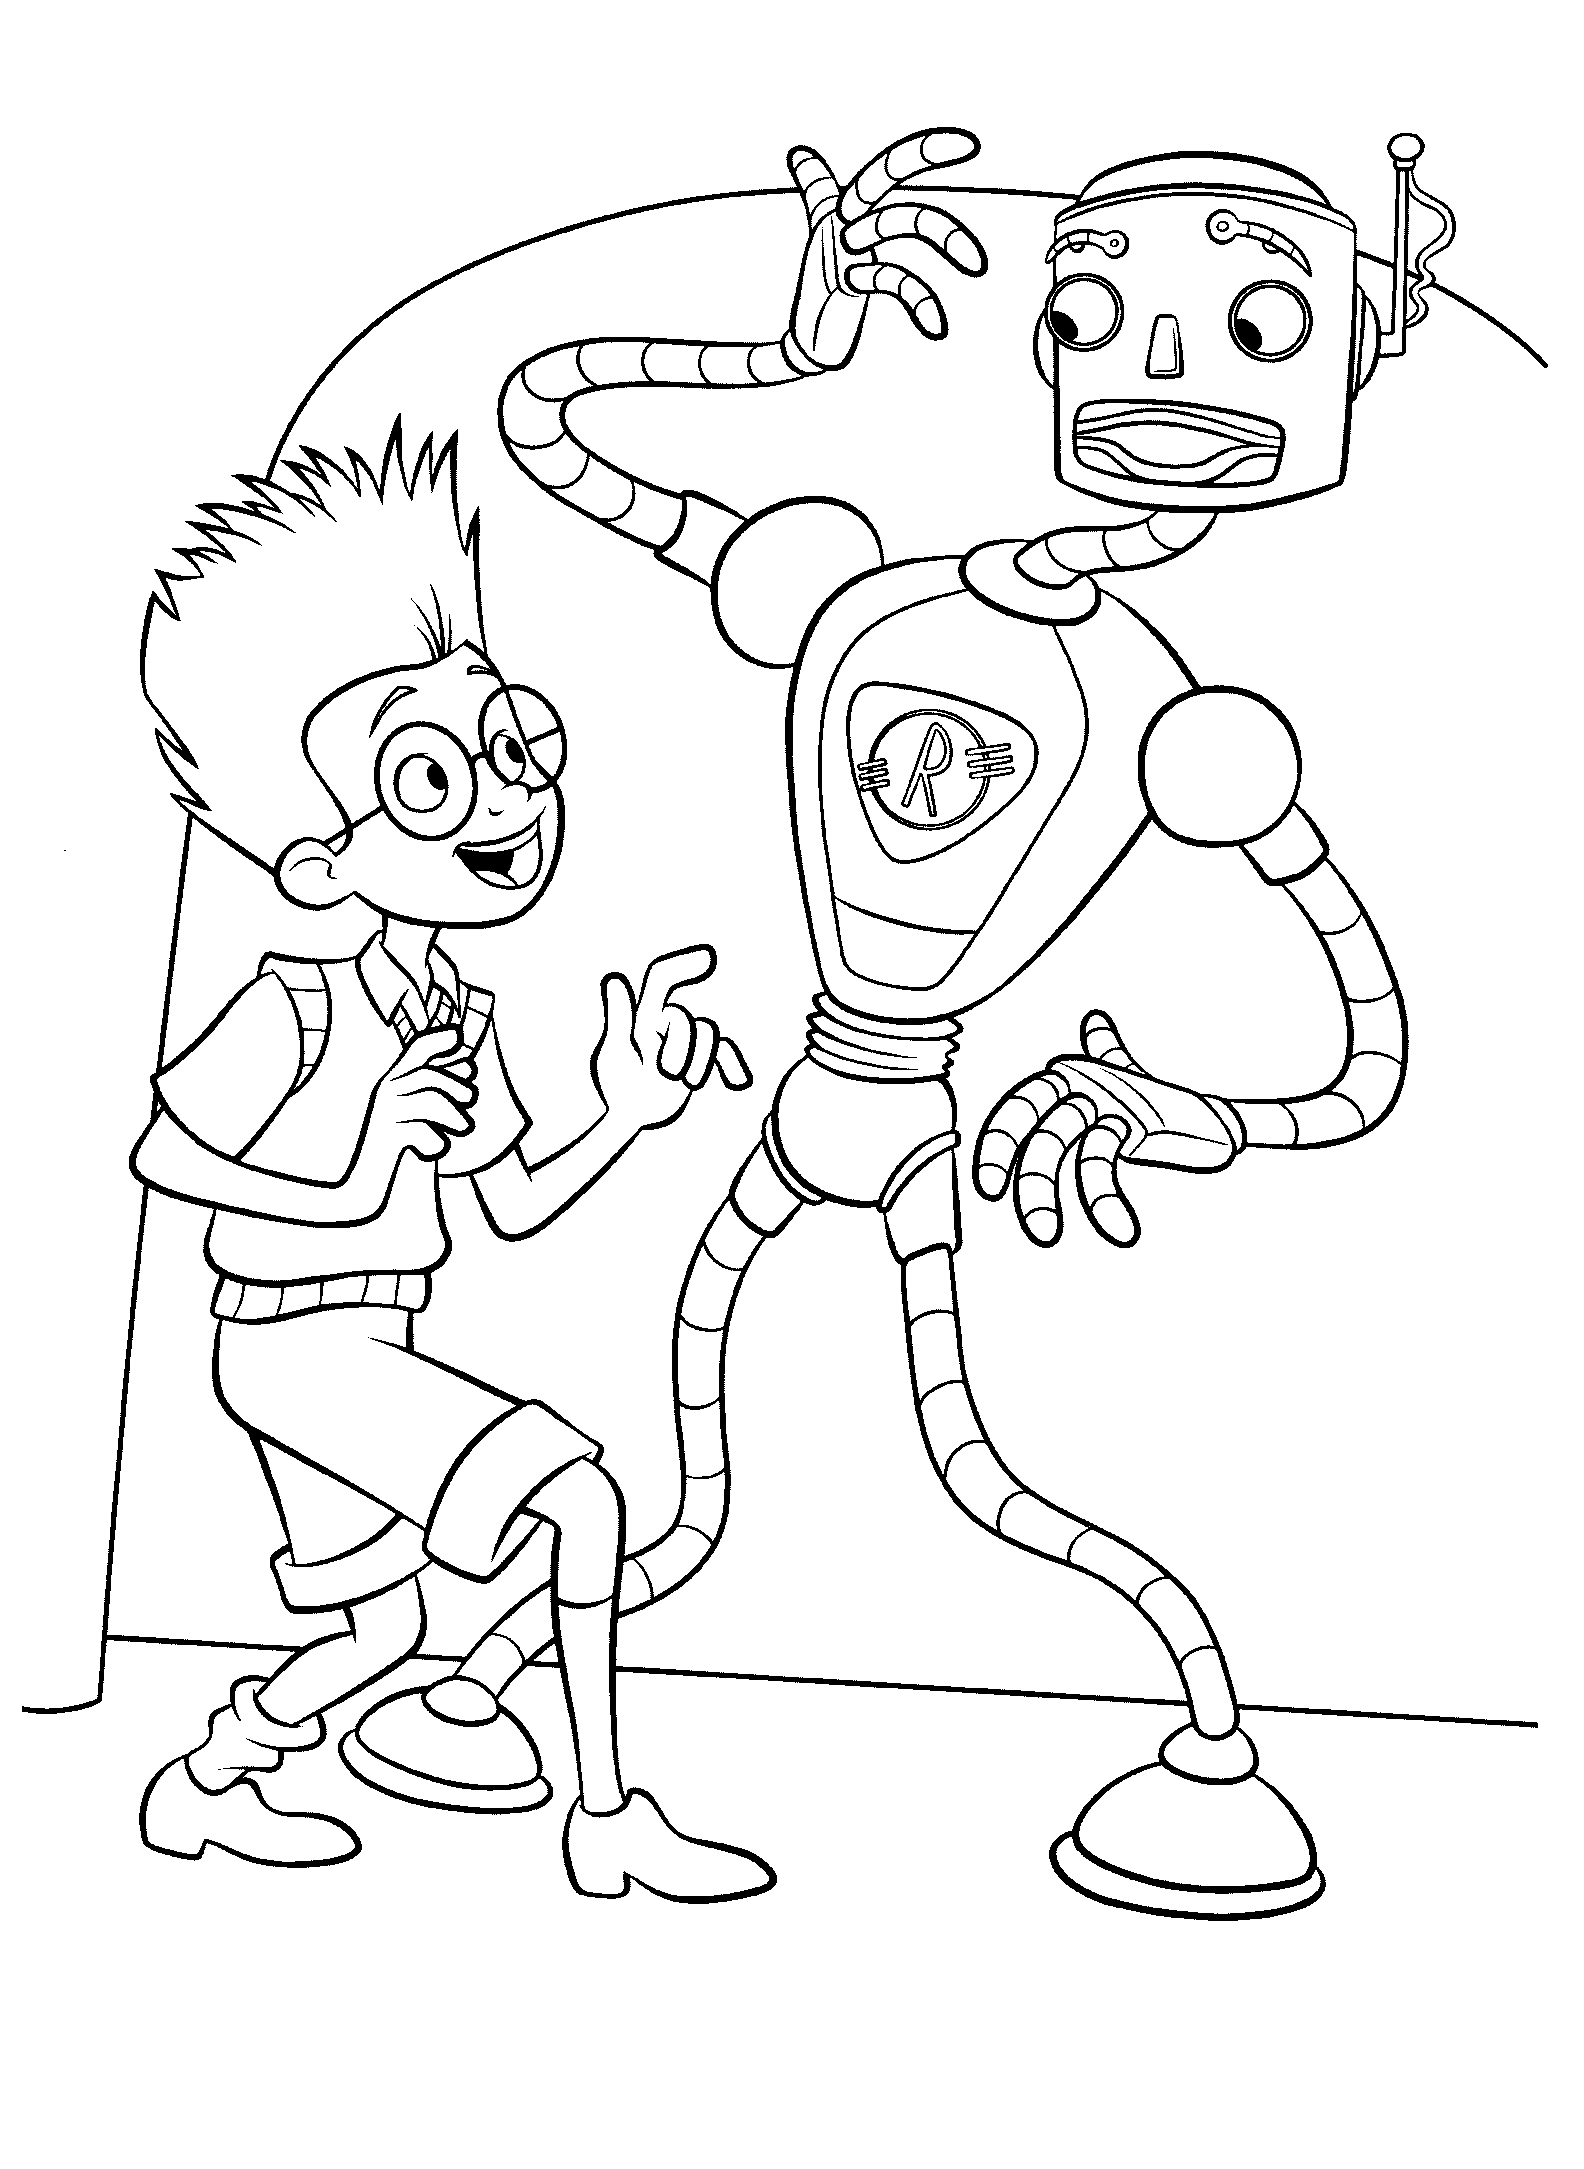 Coloring page - Robot Carl